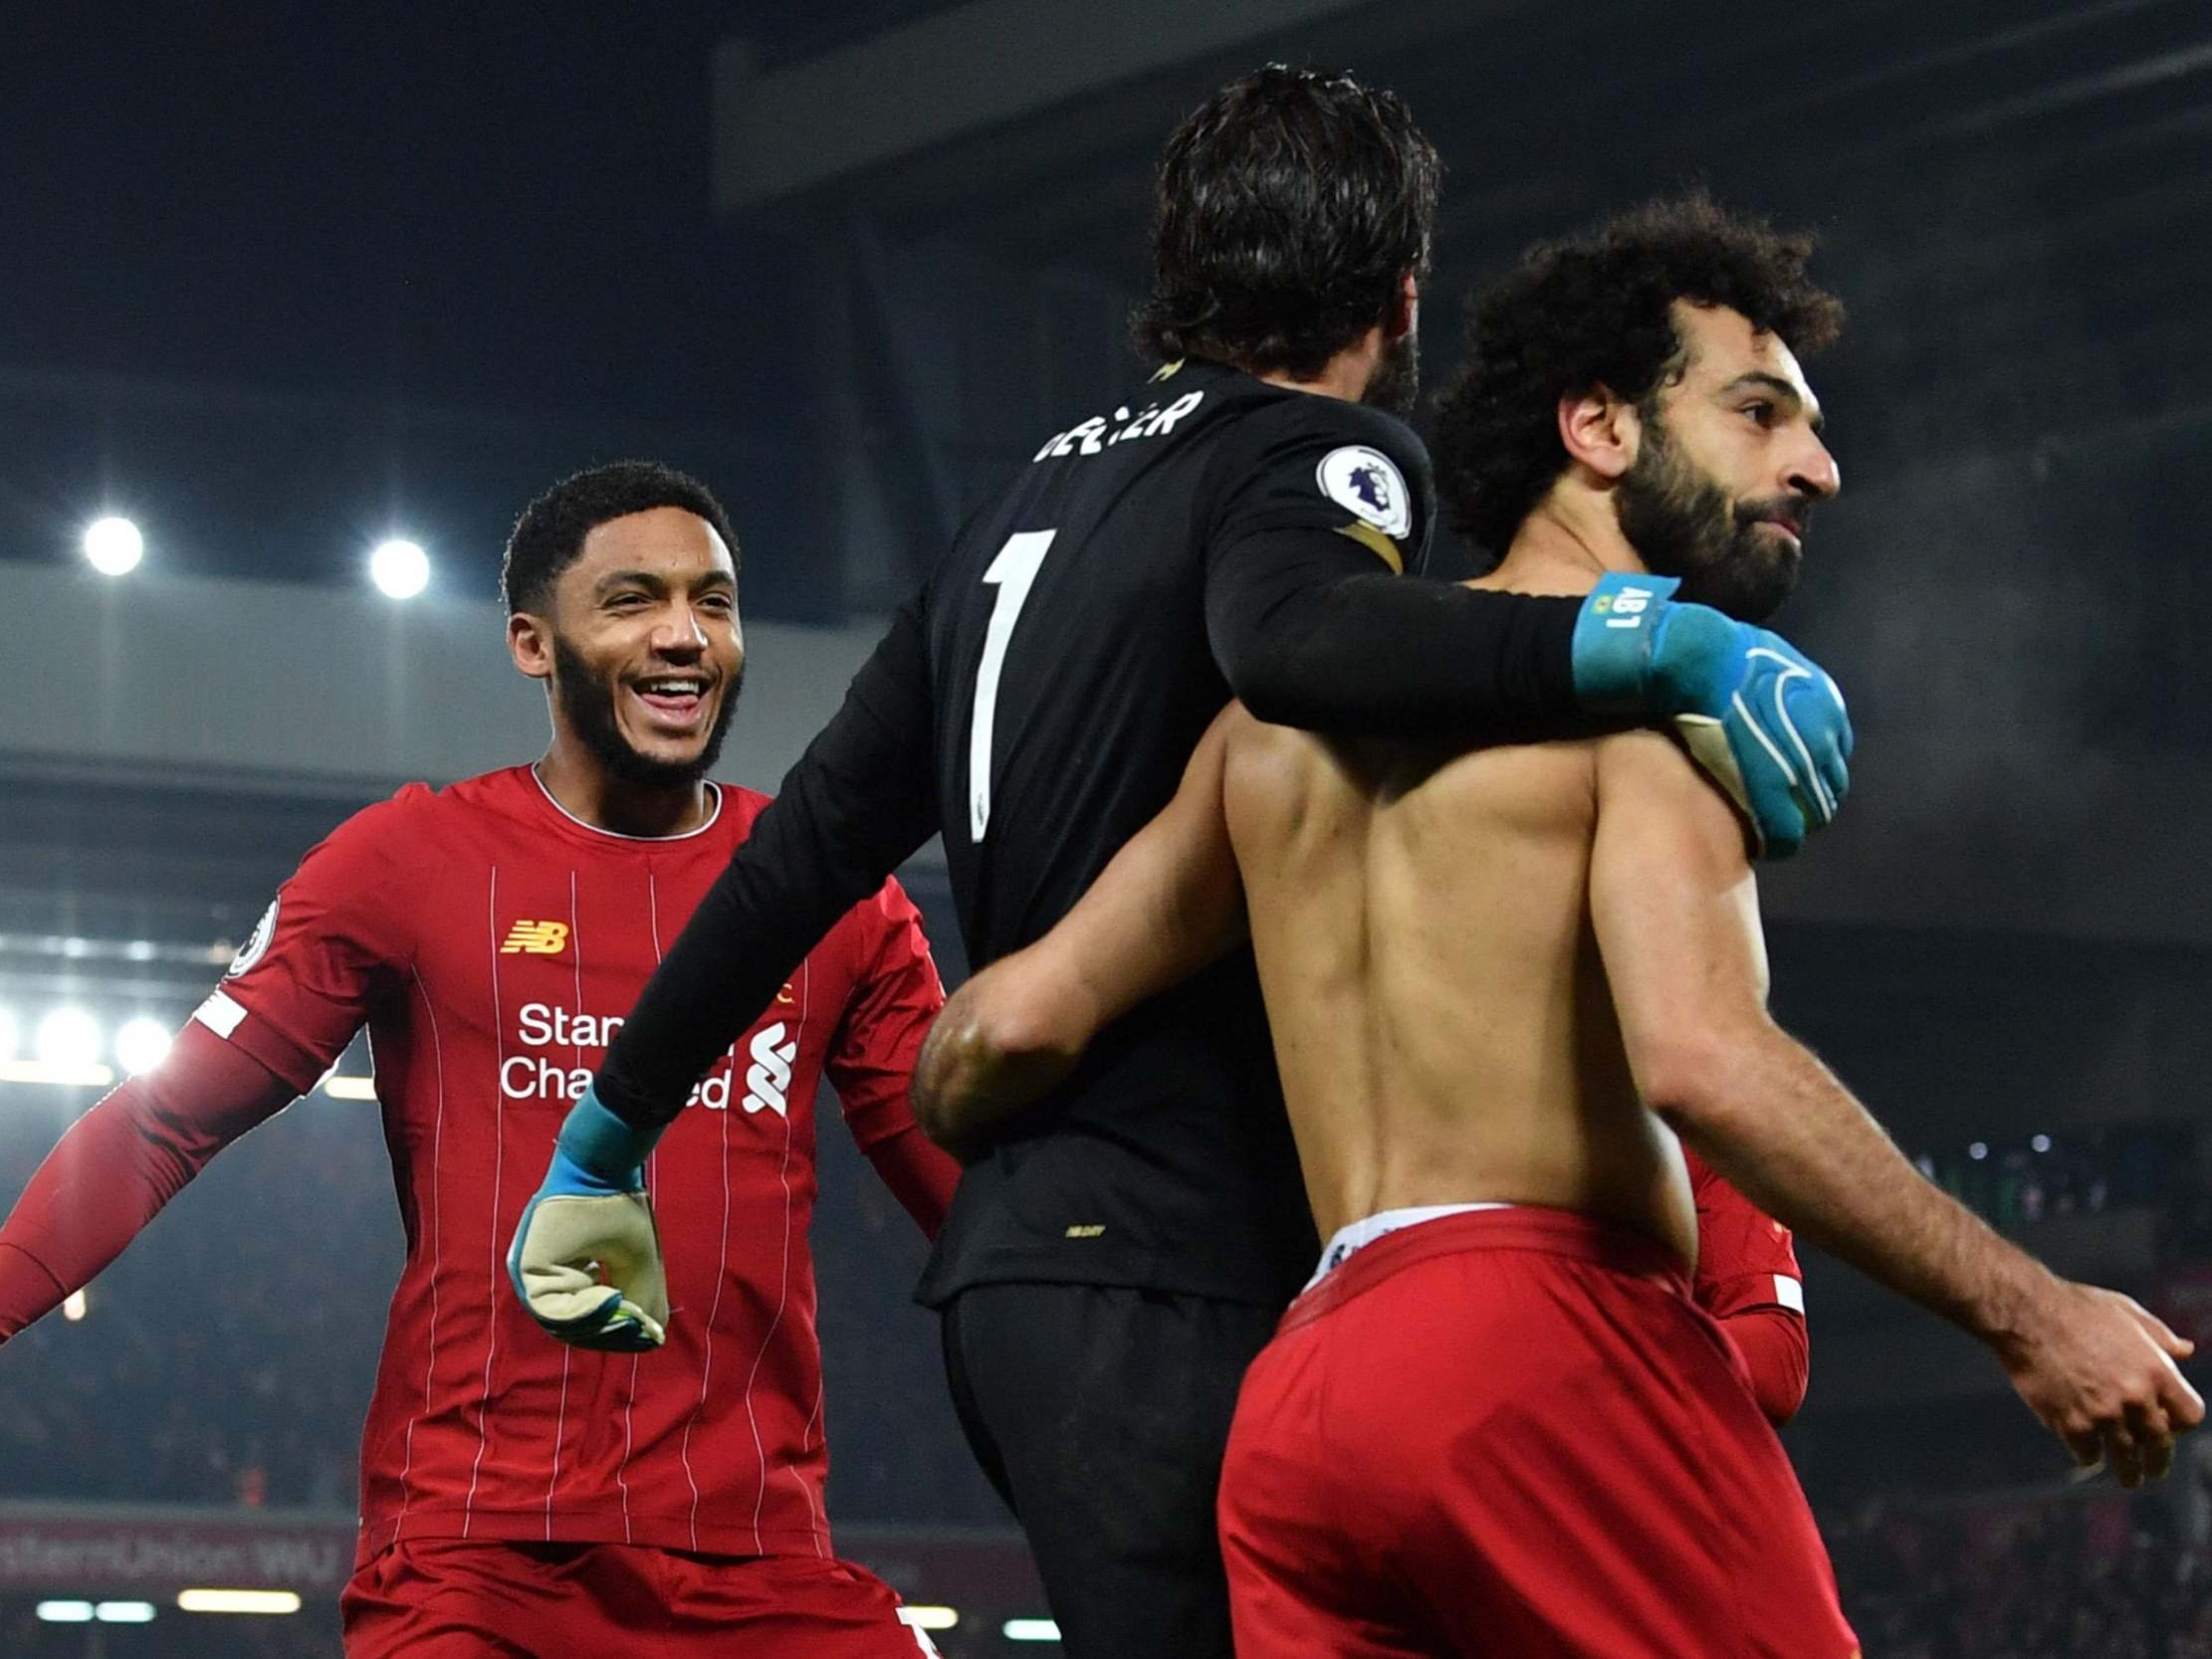 Jordan Henderson and Mohamed Salah insist focus remains on next game amid Liverpool title talk